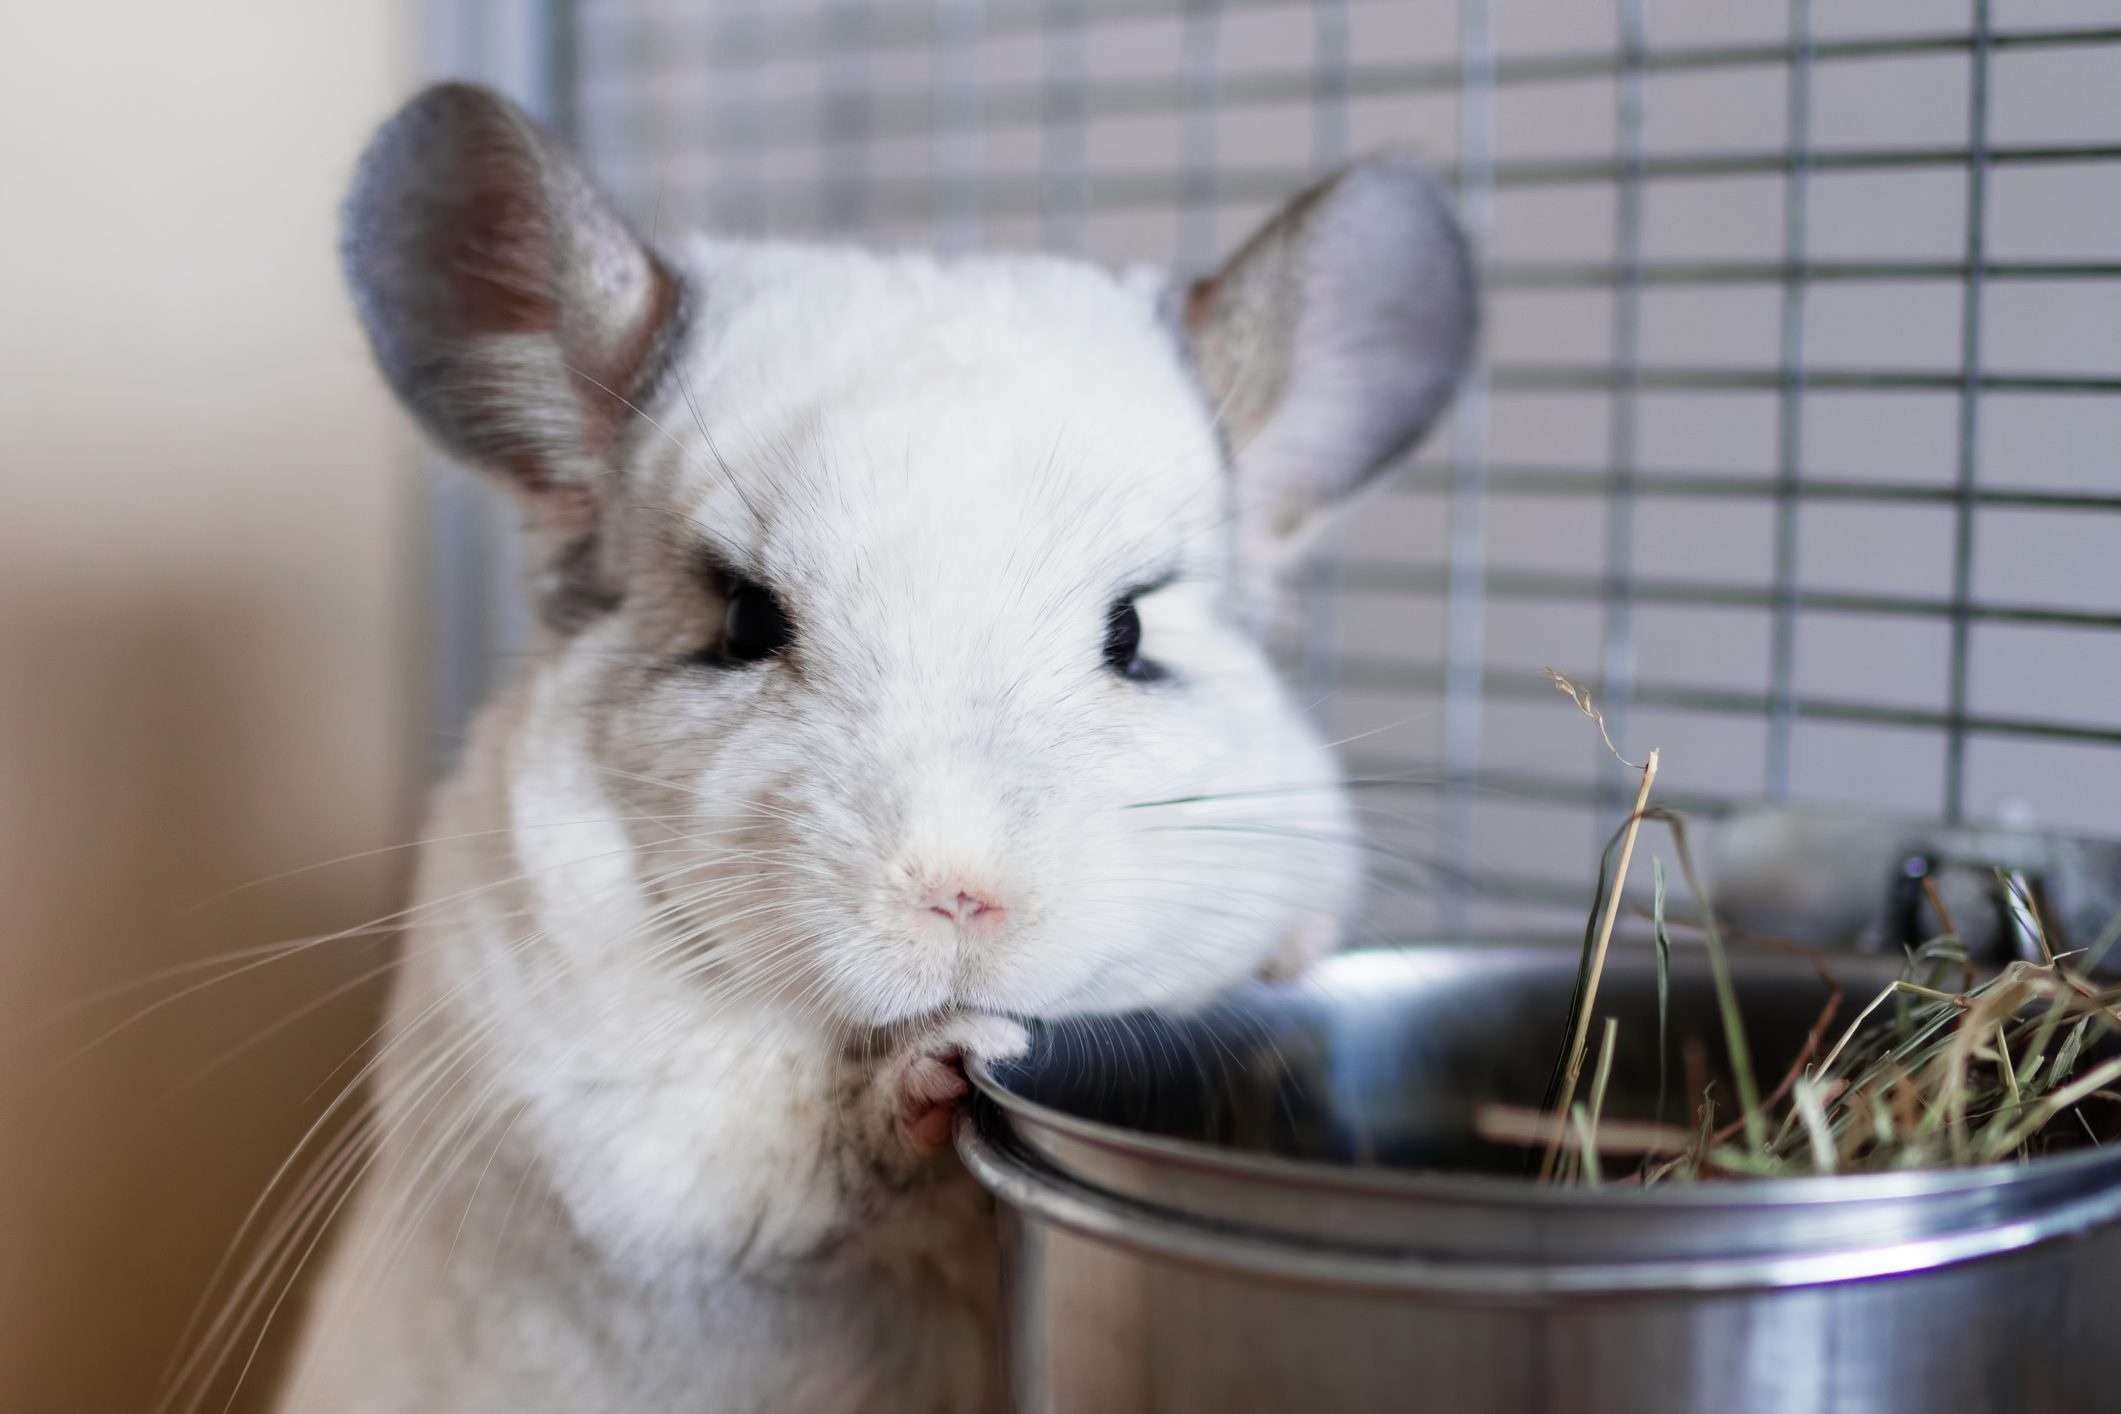 Chinchilla pictures, Adorable pet, Small and fluffy, Rodent companions, 2130x1420 HD Desktop